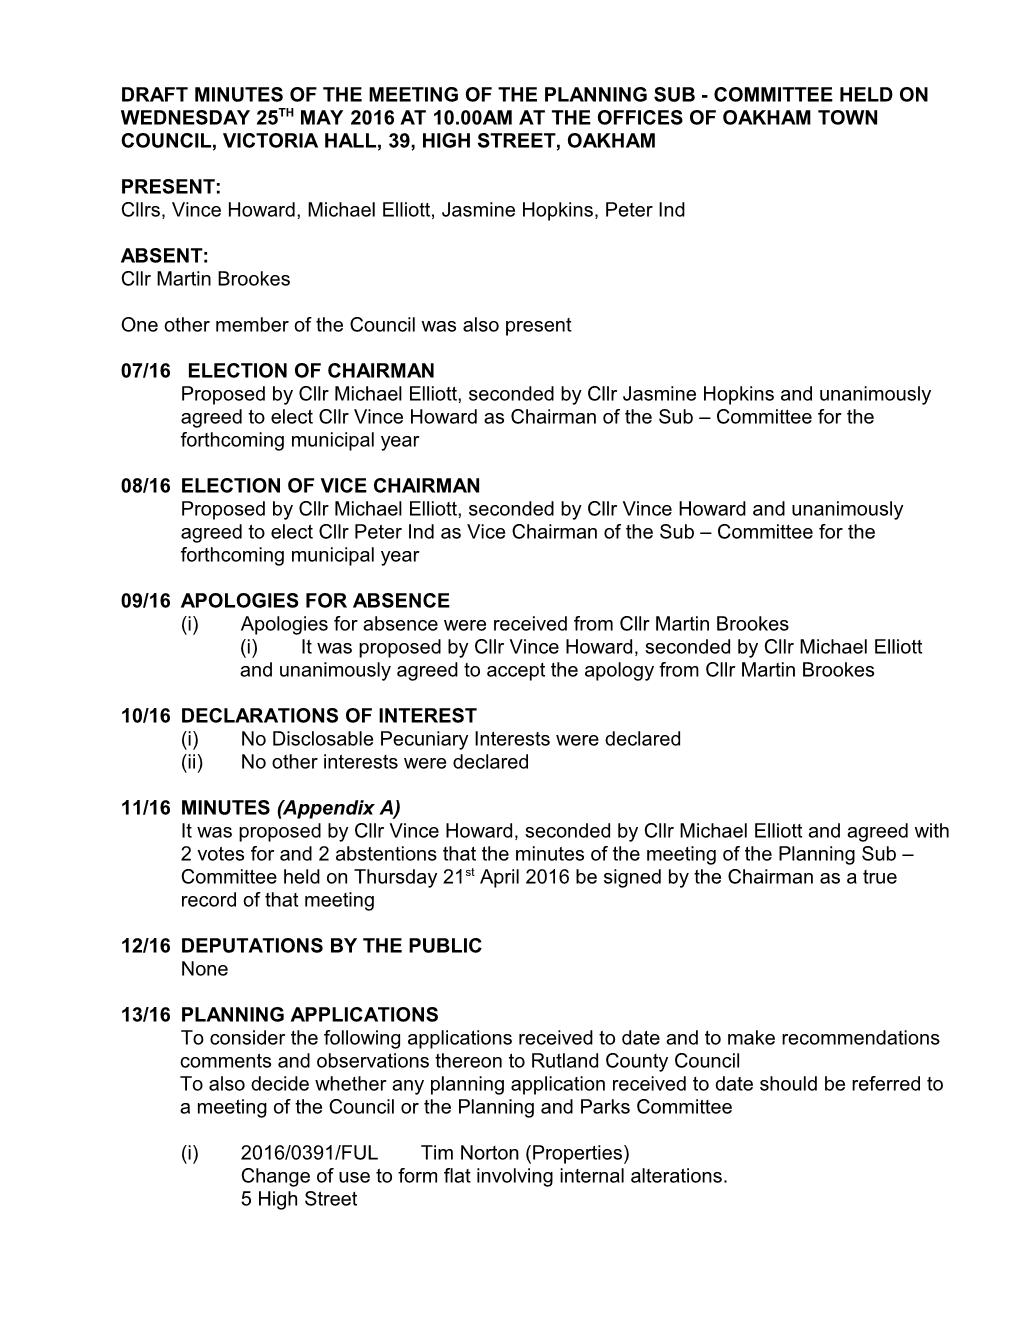 DRAFT MINUTES of the PLANNING and PARKS COMMITTEE HELD on WEDNESDAY JULY 27Th 2011 at THE